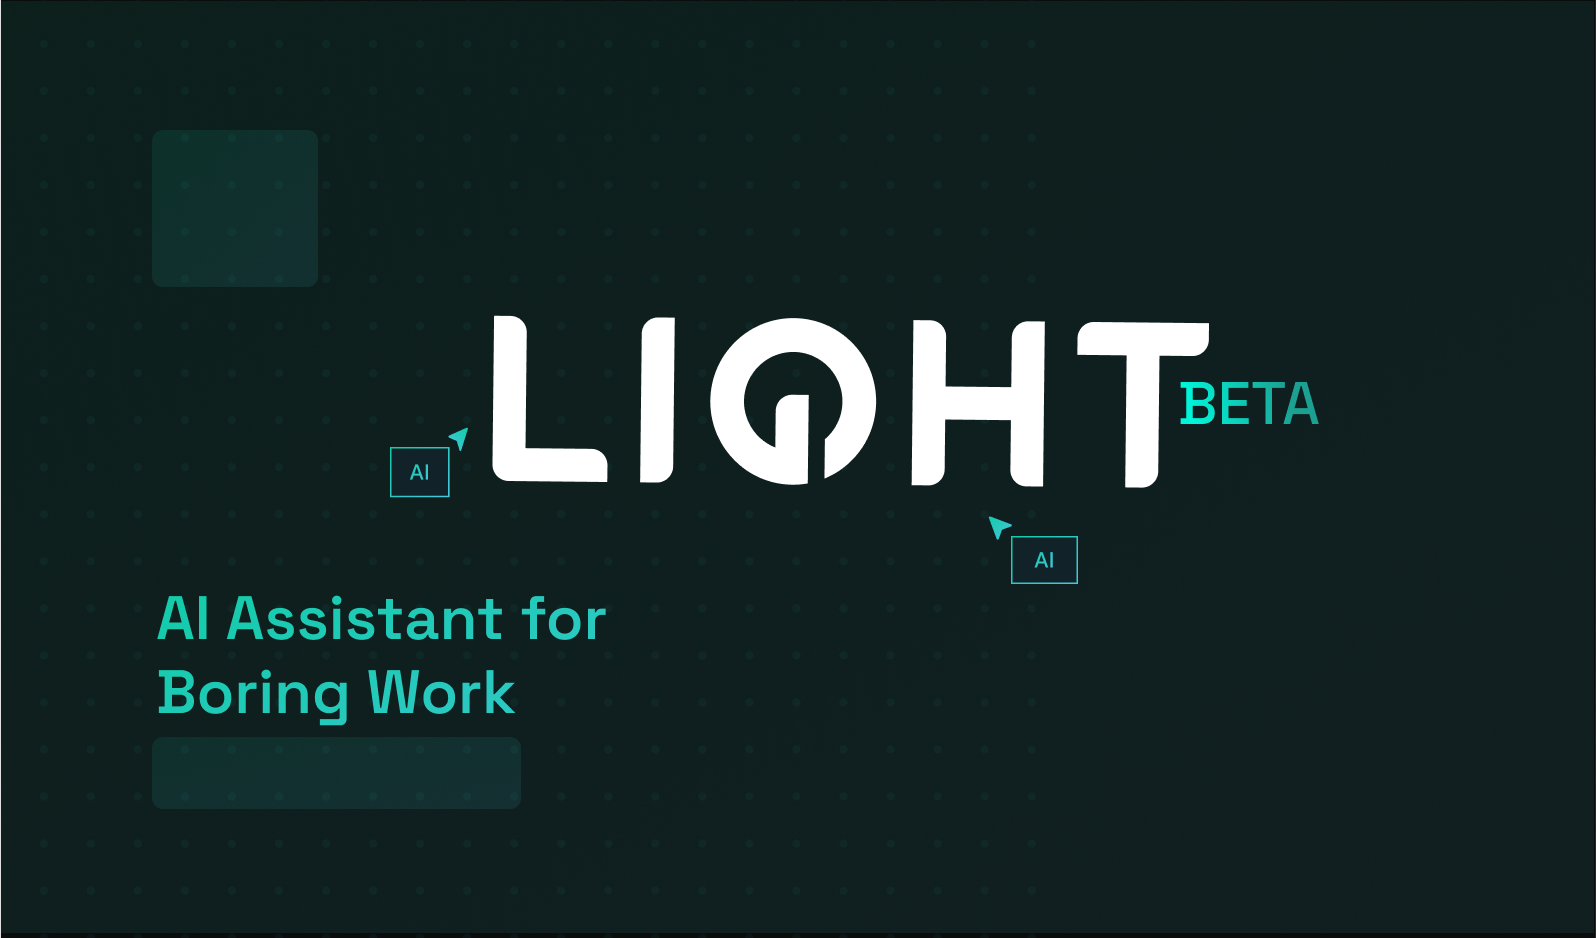 Light - An assistant tool to automate and perform mundane tasks